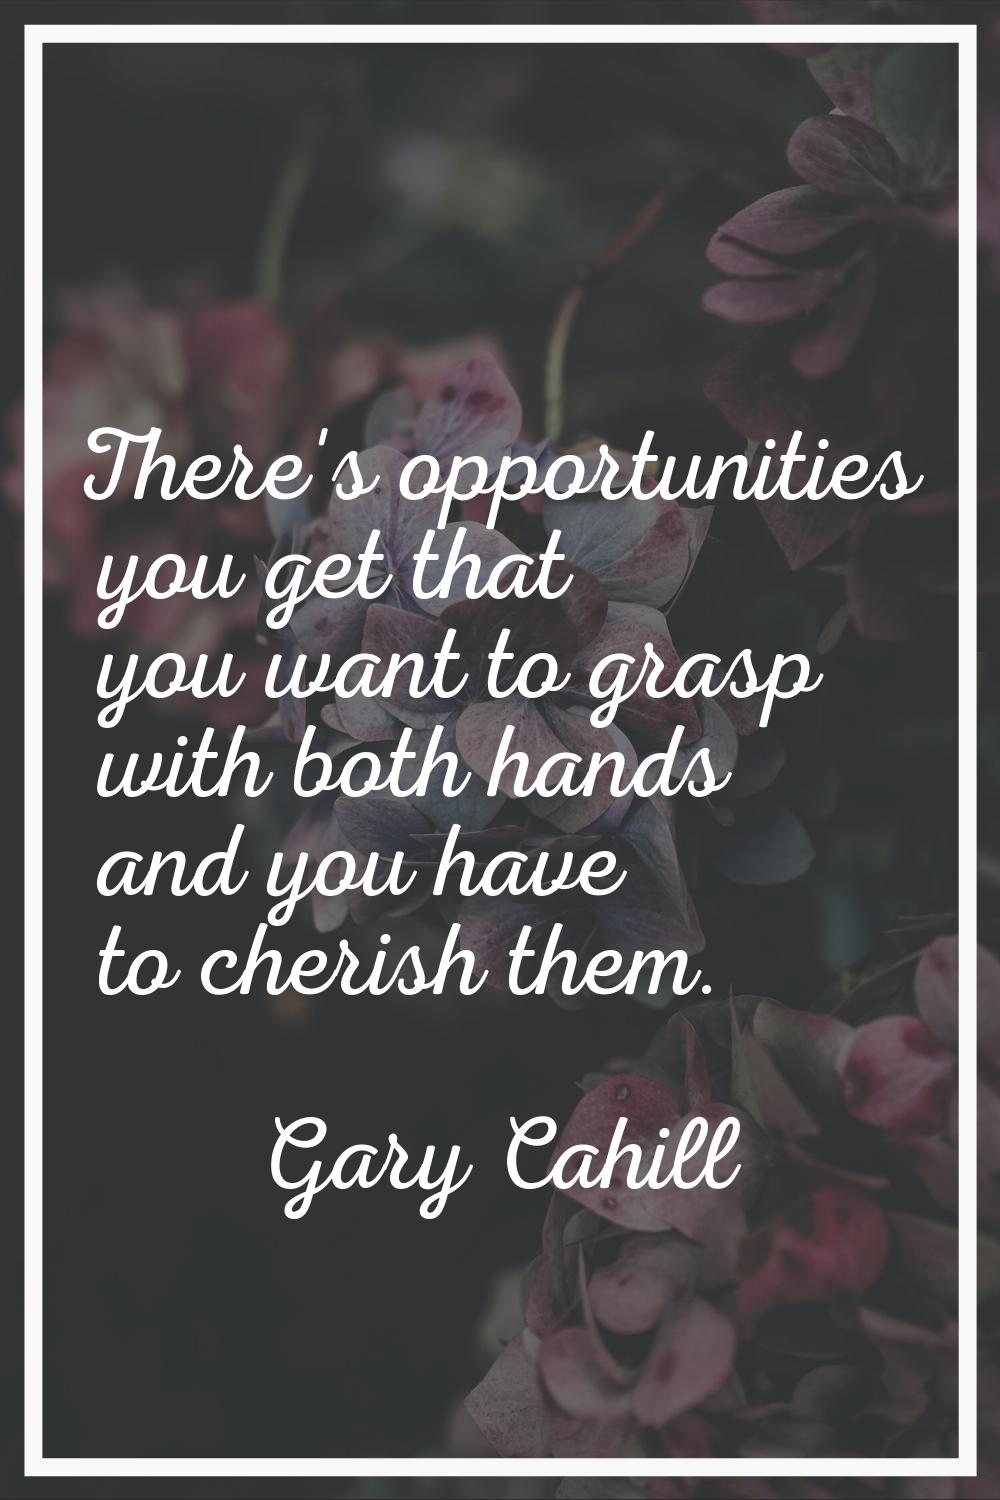 There's opportunities you get that you want to grasp with both hands and you have to cherish them.